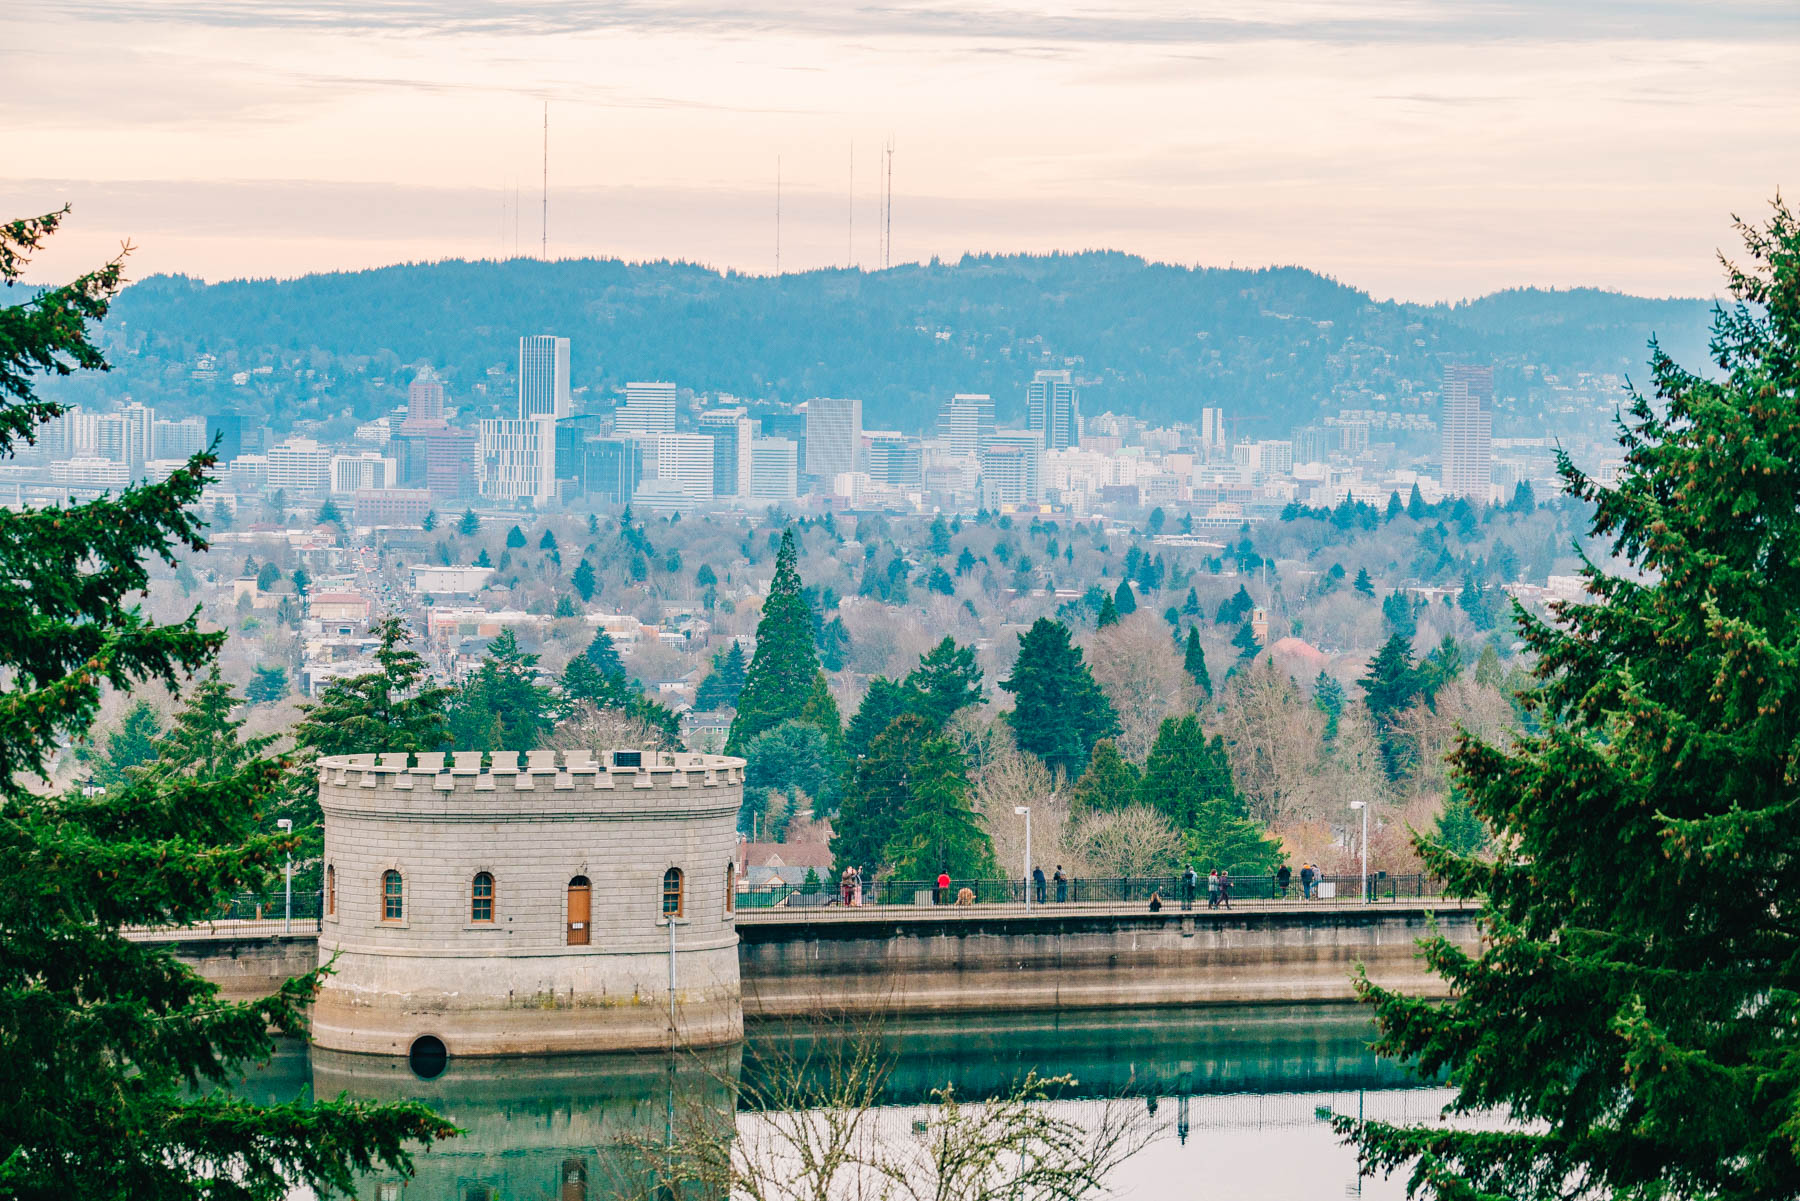 Mt. Tabor viewpoint
Fascinating facts about Oregon